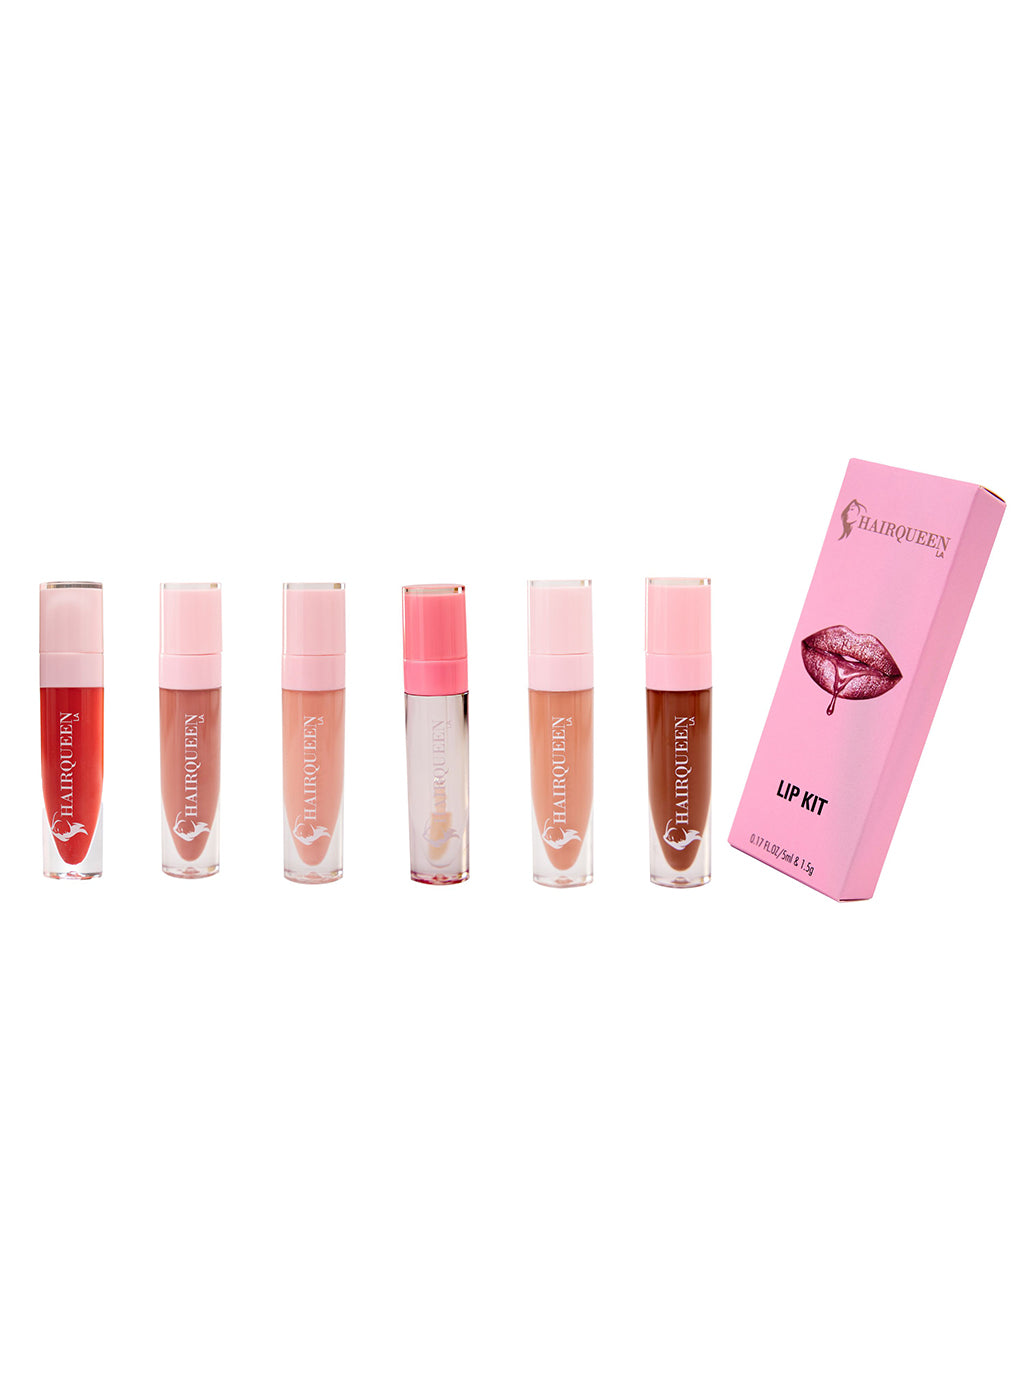 Legacy Lip Kit Collection